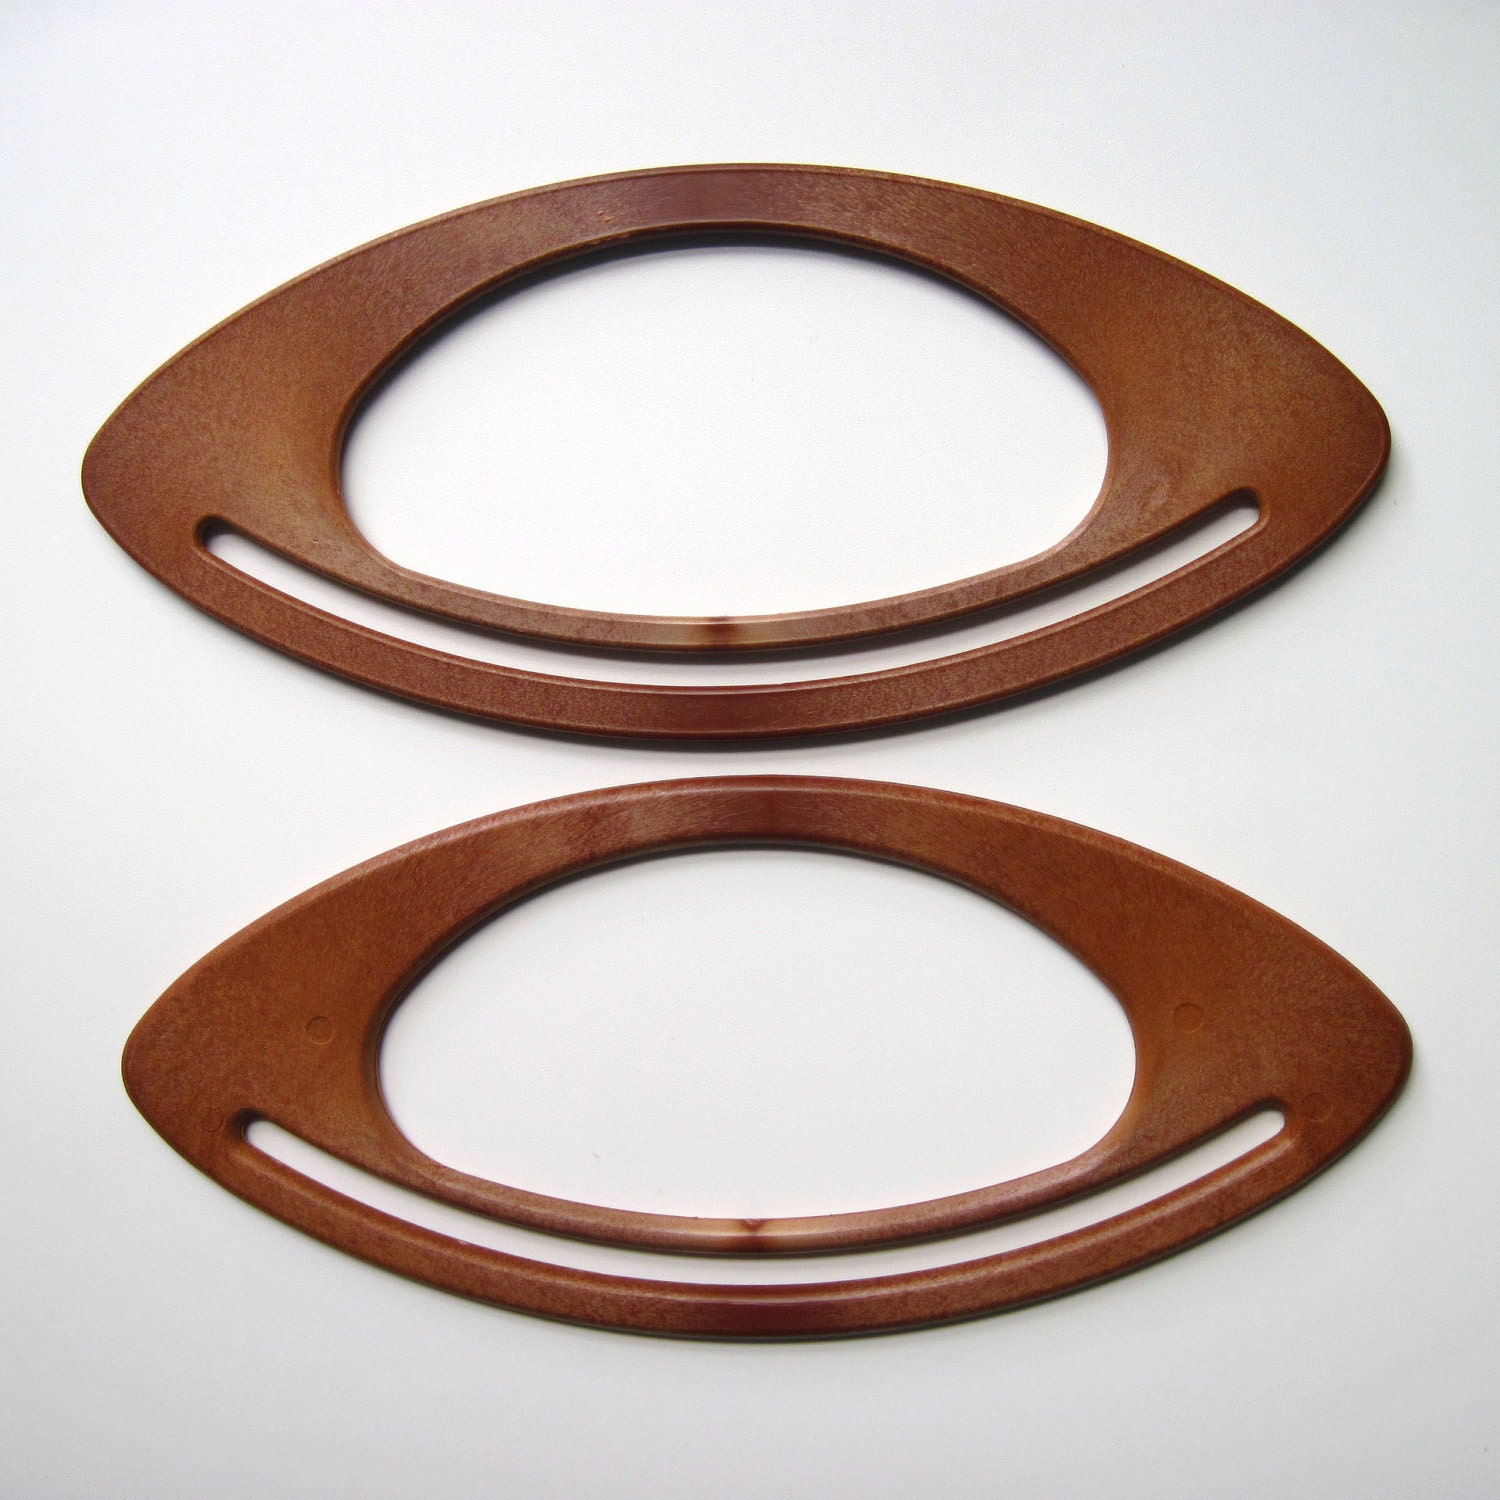 Oval bag Handles pair of oval purse handles brown wooden